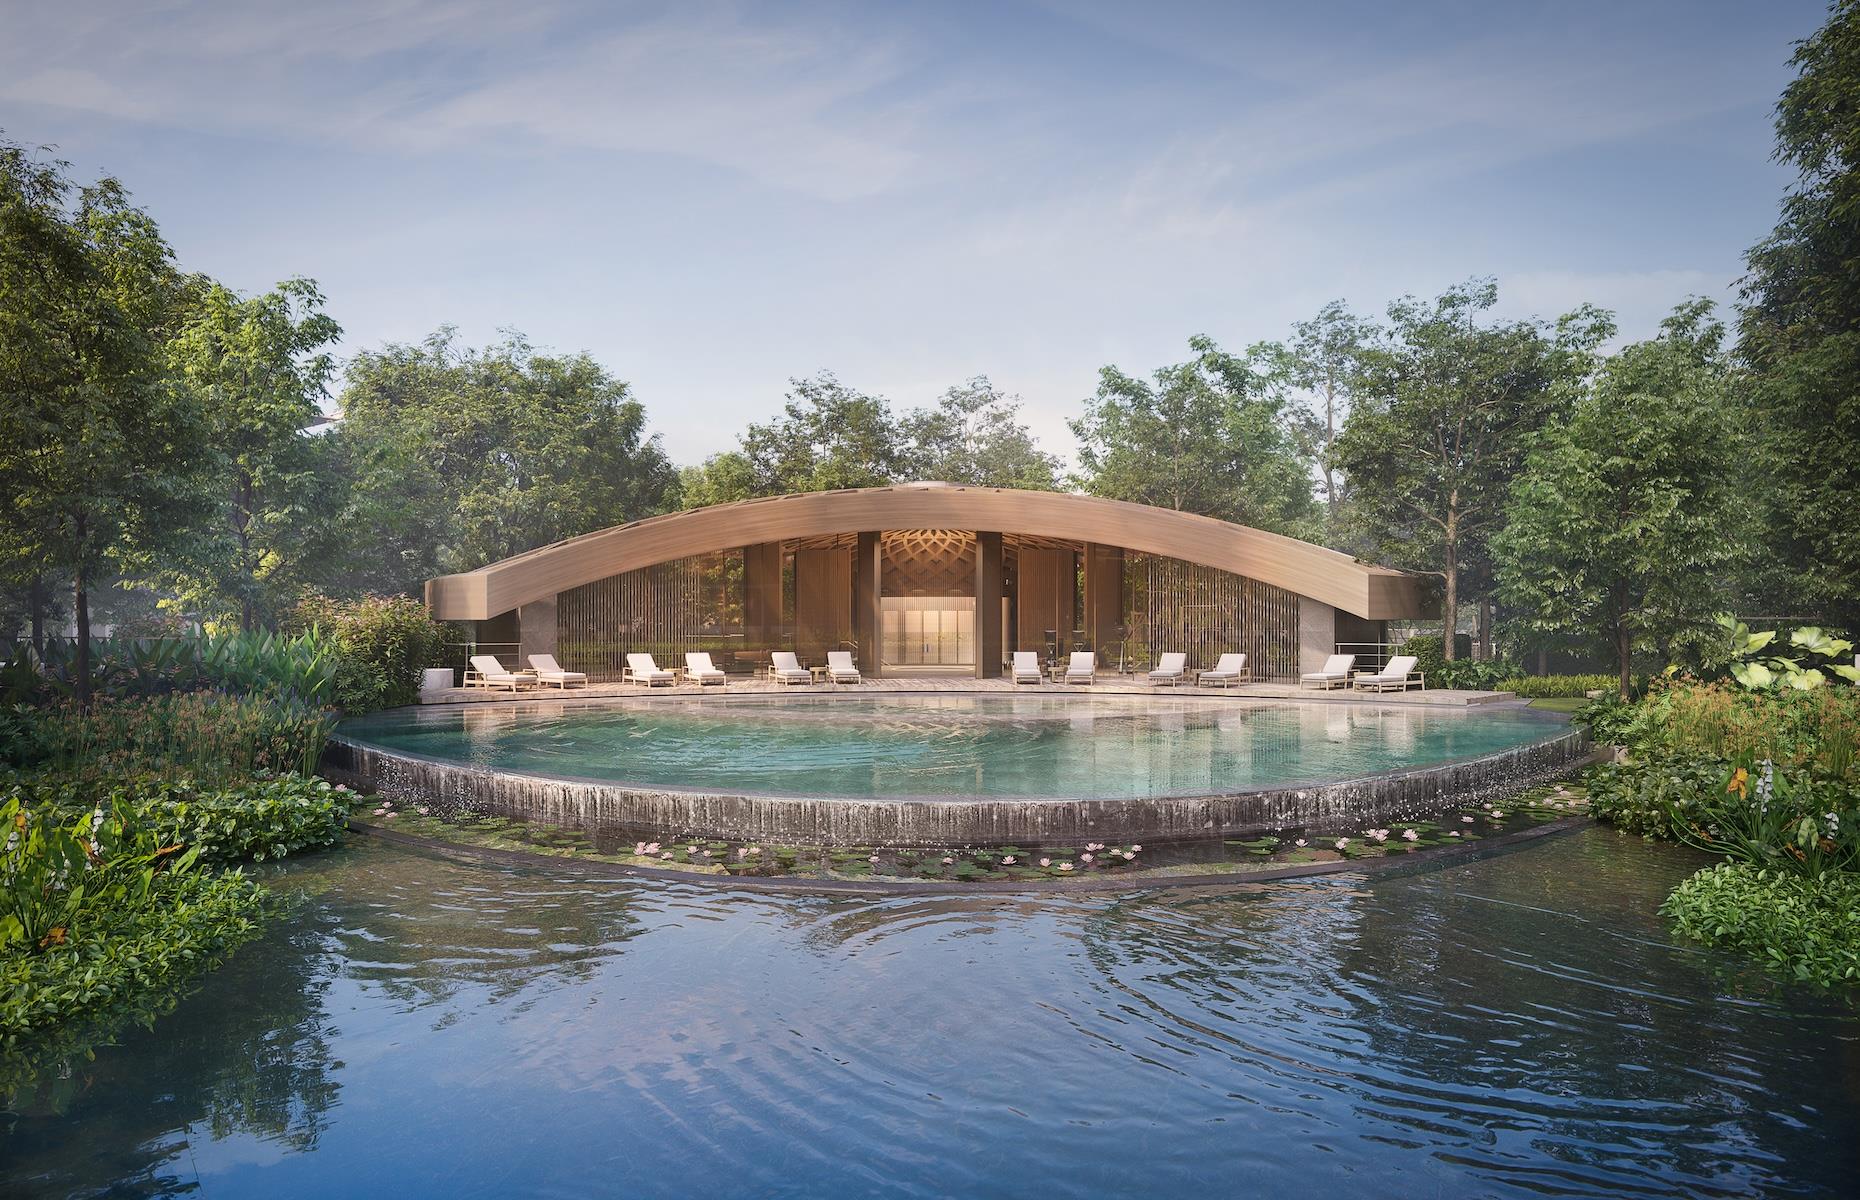 <p>Poised to open at the end of the year or the start of 2025 in a purpose-built forest close to bustling Bangkok, this leafy luxury escape from Six Senses is sure to make tree huggers swoon. With 60 guest rooms, 27 residences, restaurants and a co-working space, Six Senses The Forestias will be centered around a woodland lagoon. Wellbeing and nature are central to the design, which aims to have a “therapeutic and calming effect” on guests. Along with the latest health and wellness facilities, its forested grounds will be laced with trails.</p>  <p><a href="https://www.loveexploring.com/galleries/106430/the-worlds-most-expensive-hotel-suites"><strong>Now check out the world's most expensive hotel suites</strong></a></p>